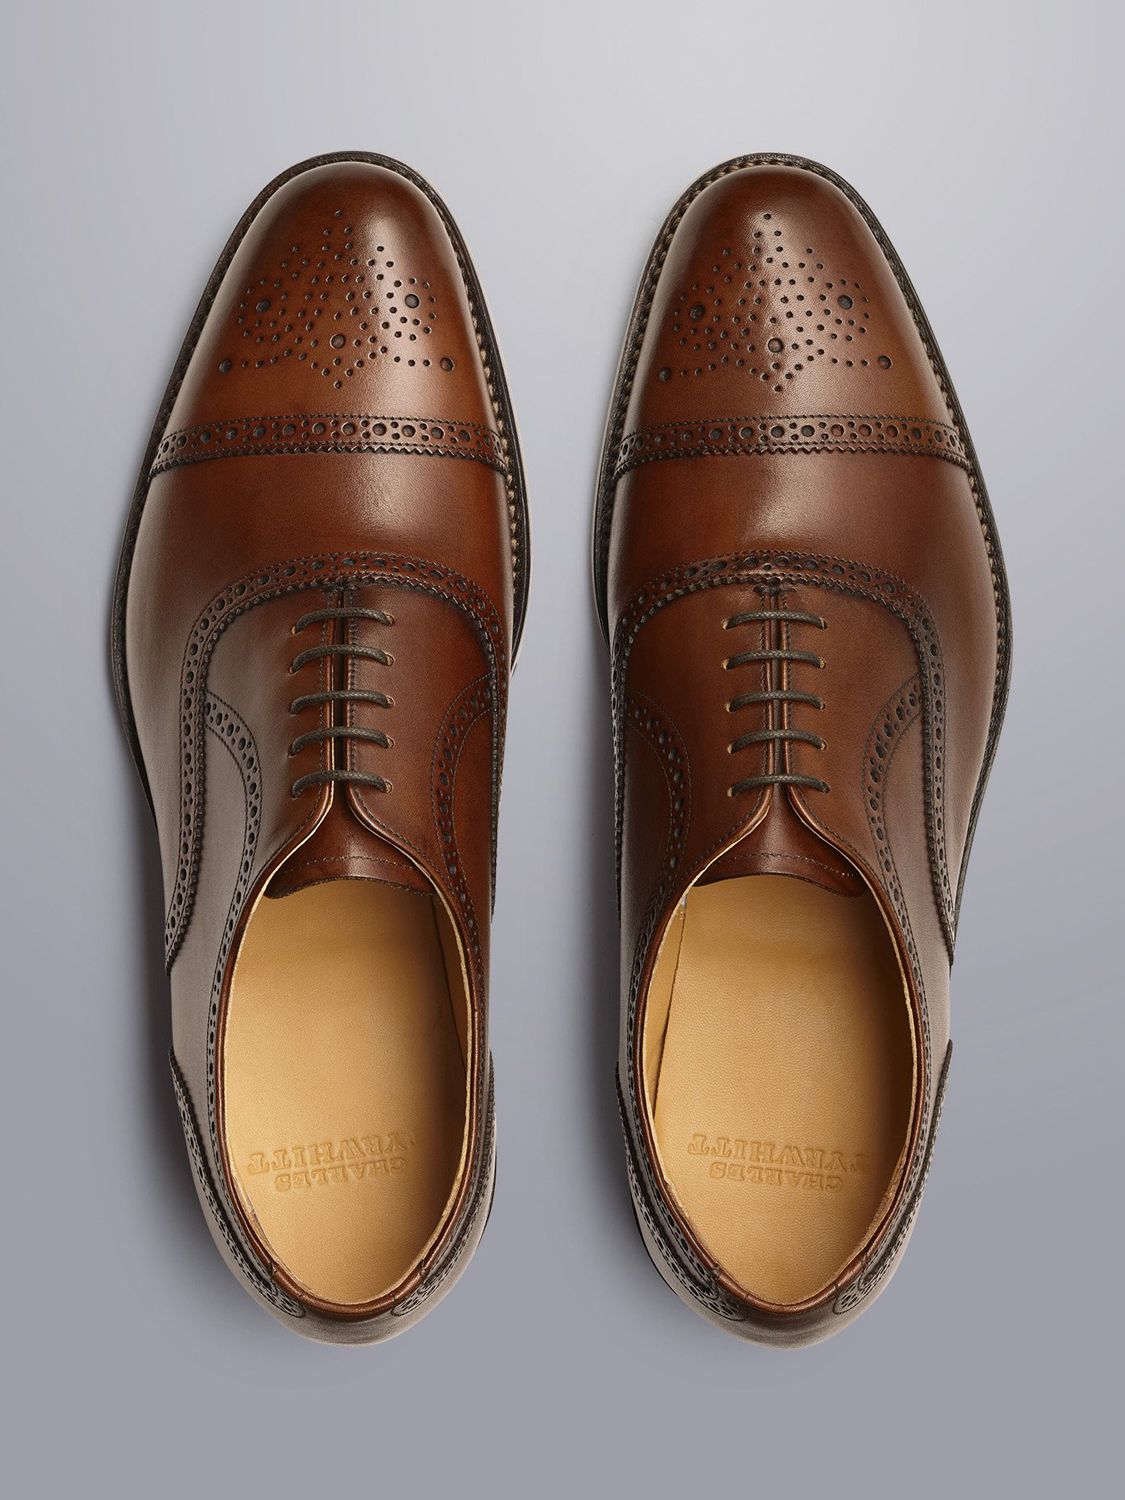 Charles Tyrwhitt Leather Oxford Brogue Shoes, Chestnut Brown, 10